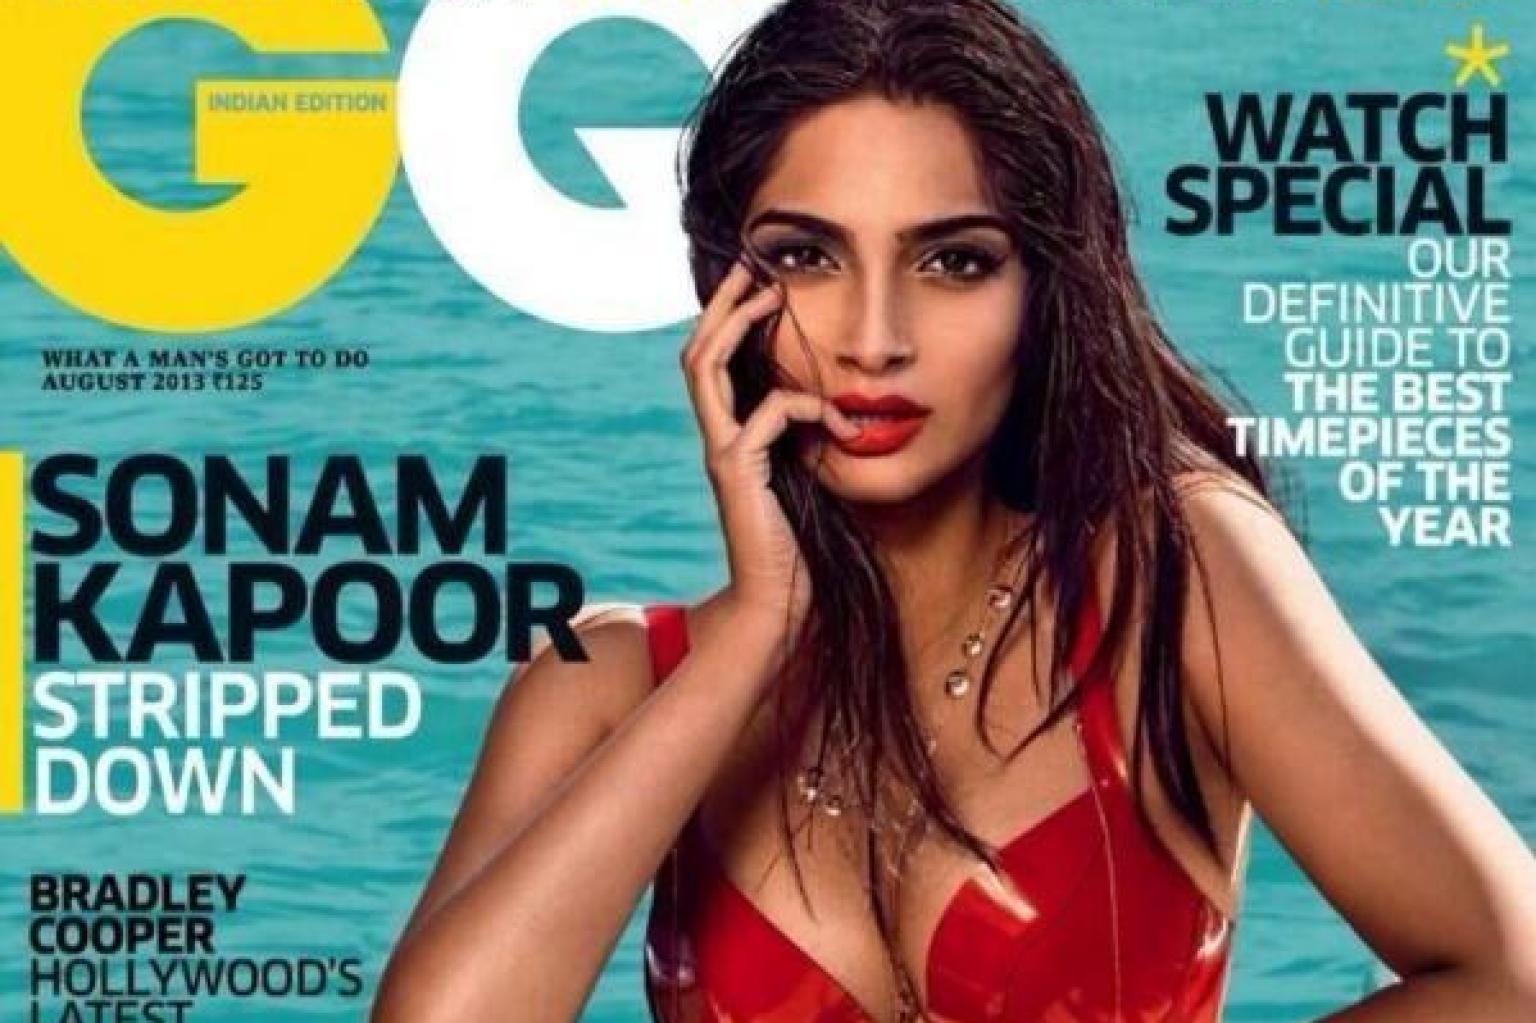 Sonam Kapoor sizzles on the cover of GQ India